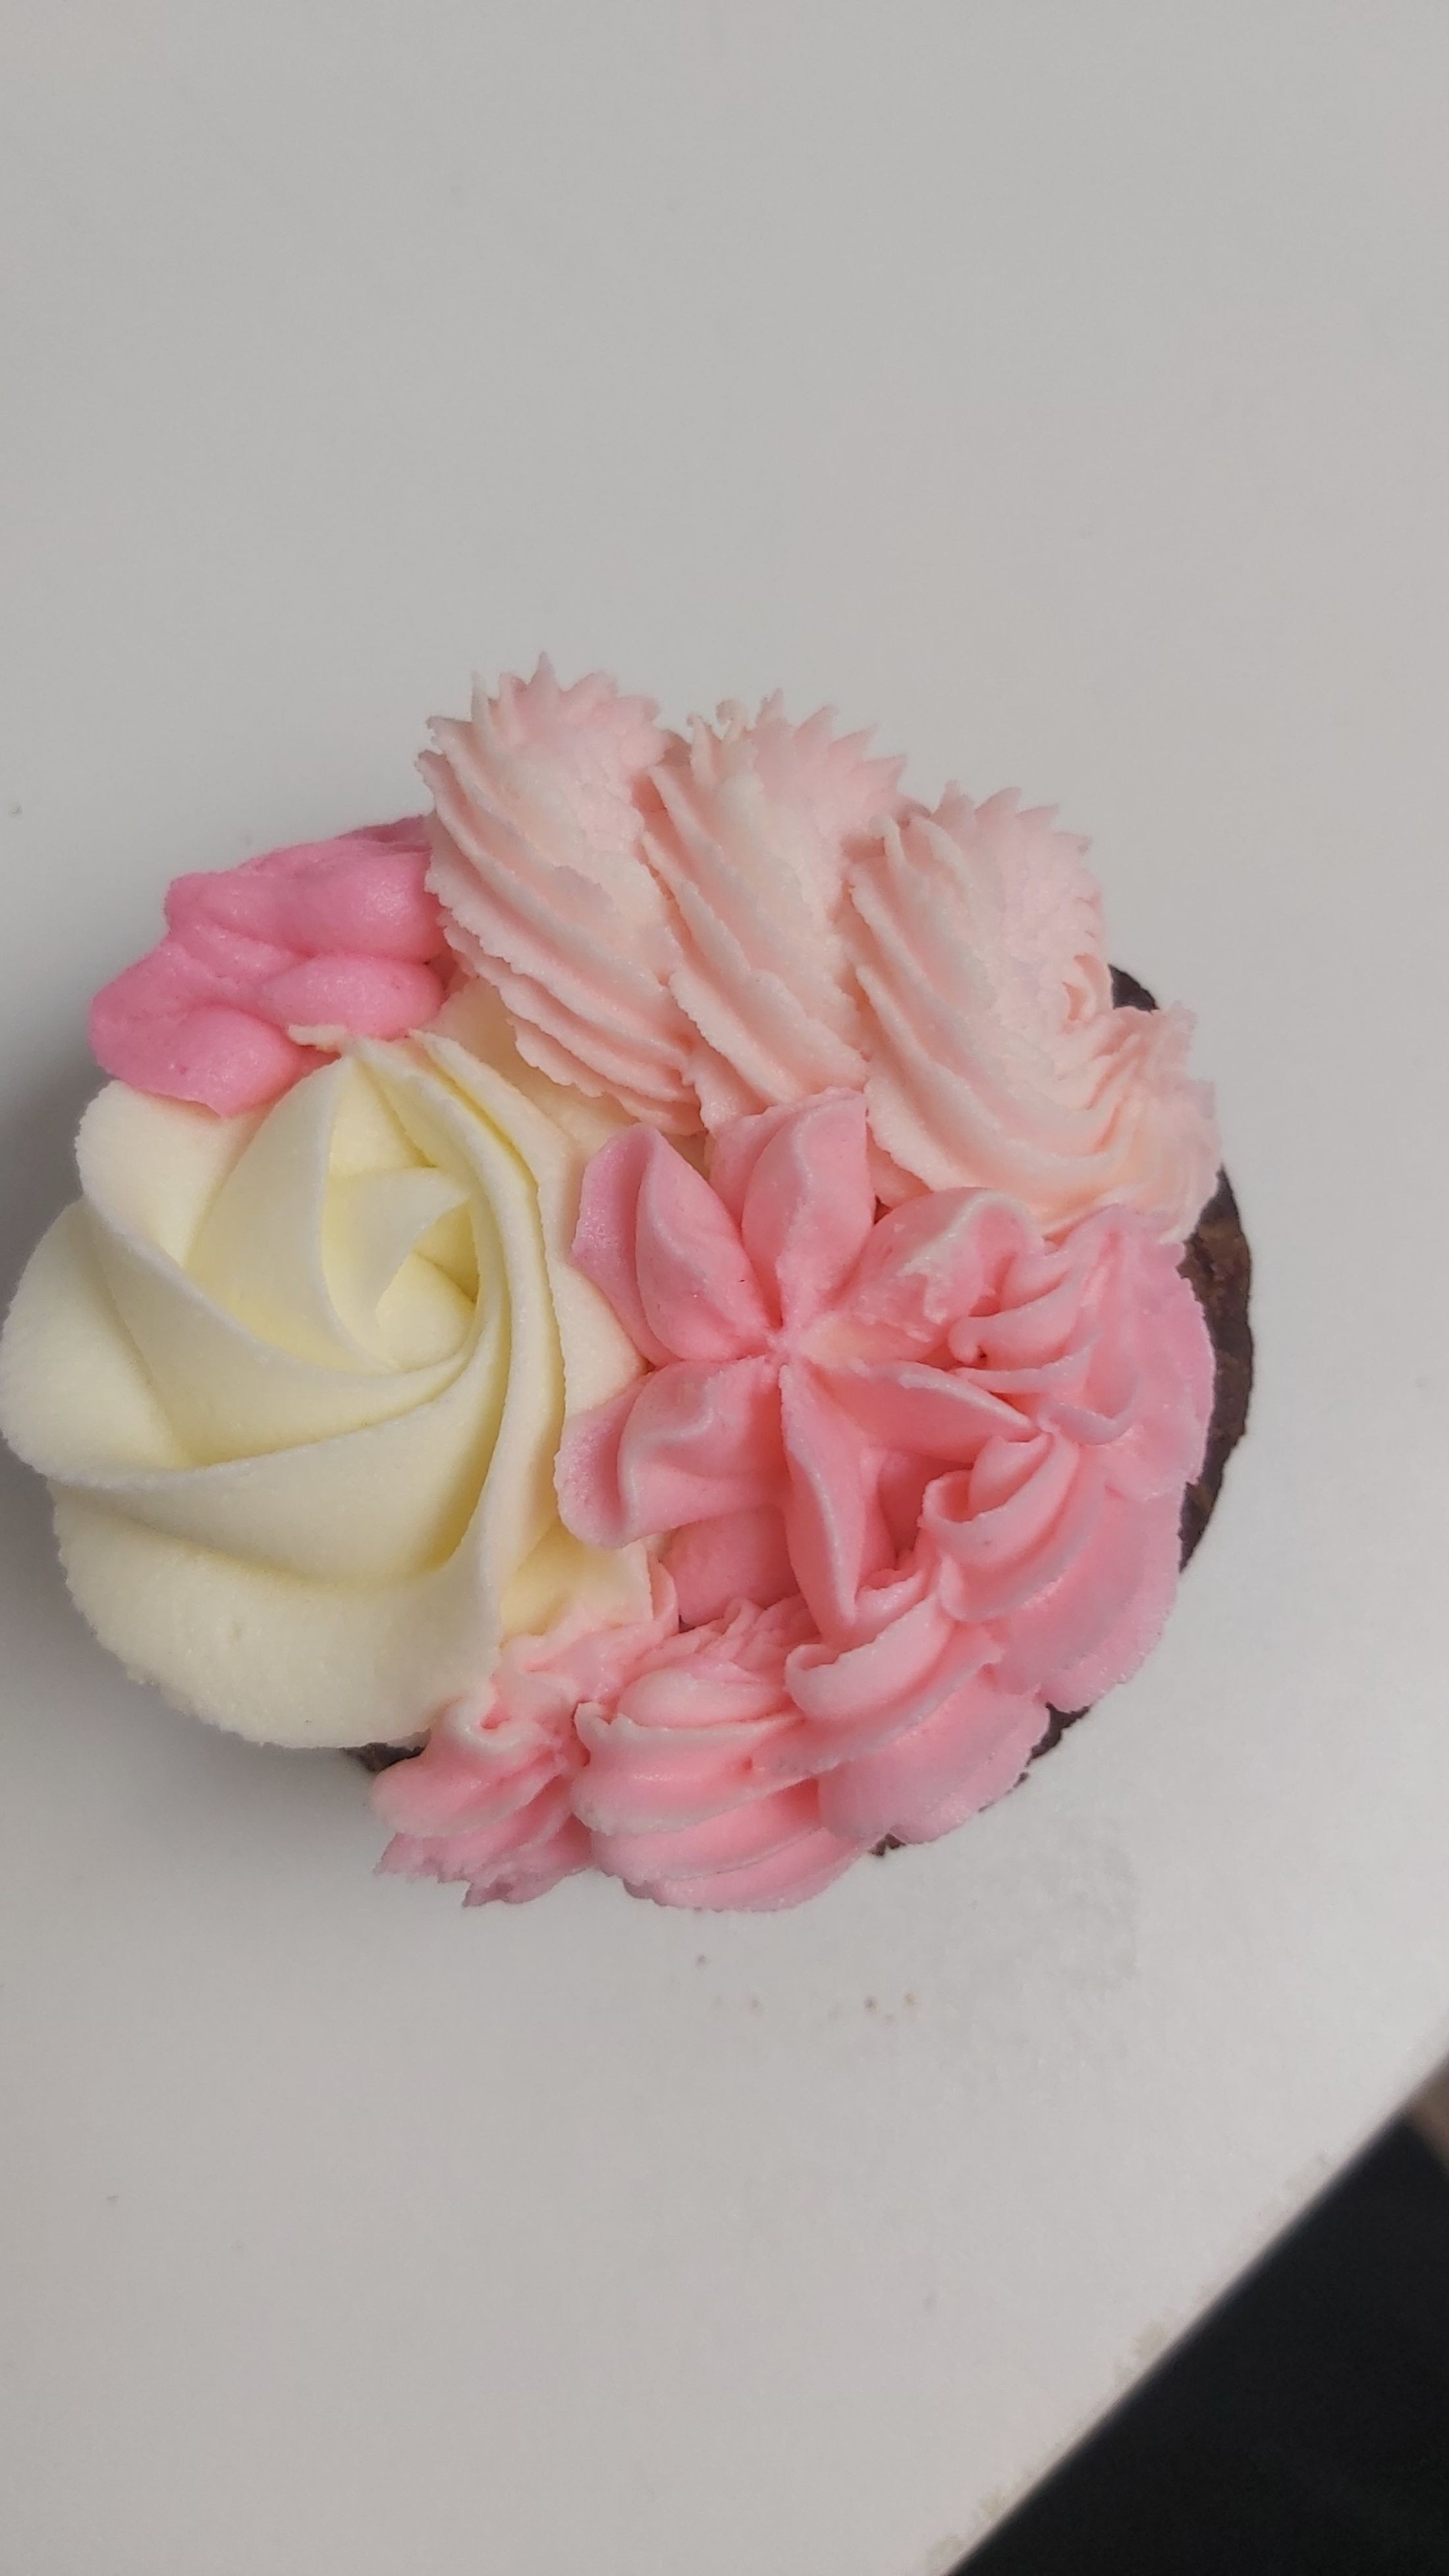 Cake Decorating - Learn how to Pipe Cup Cakes